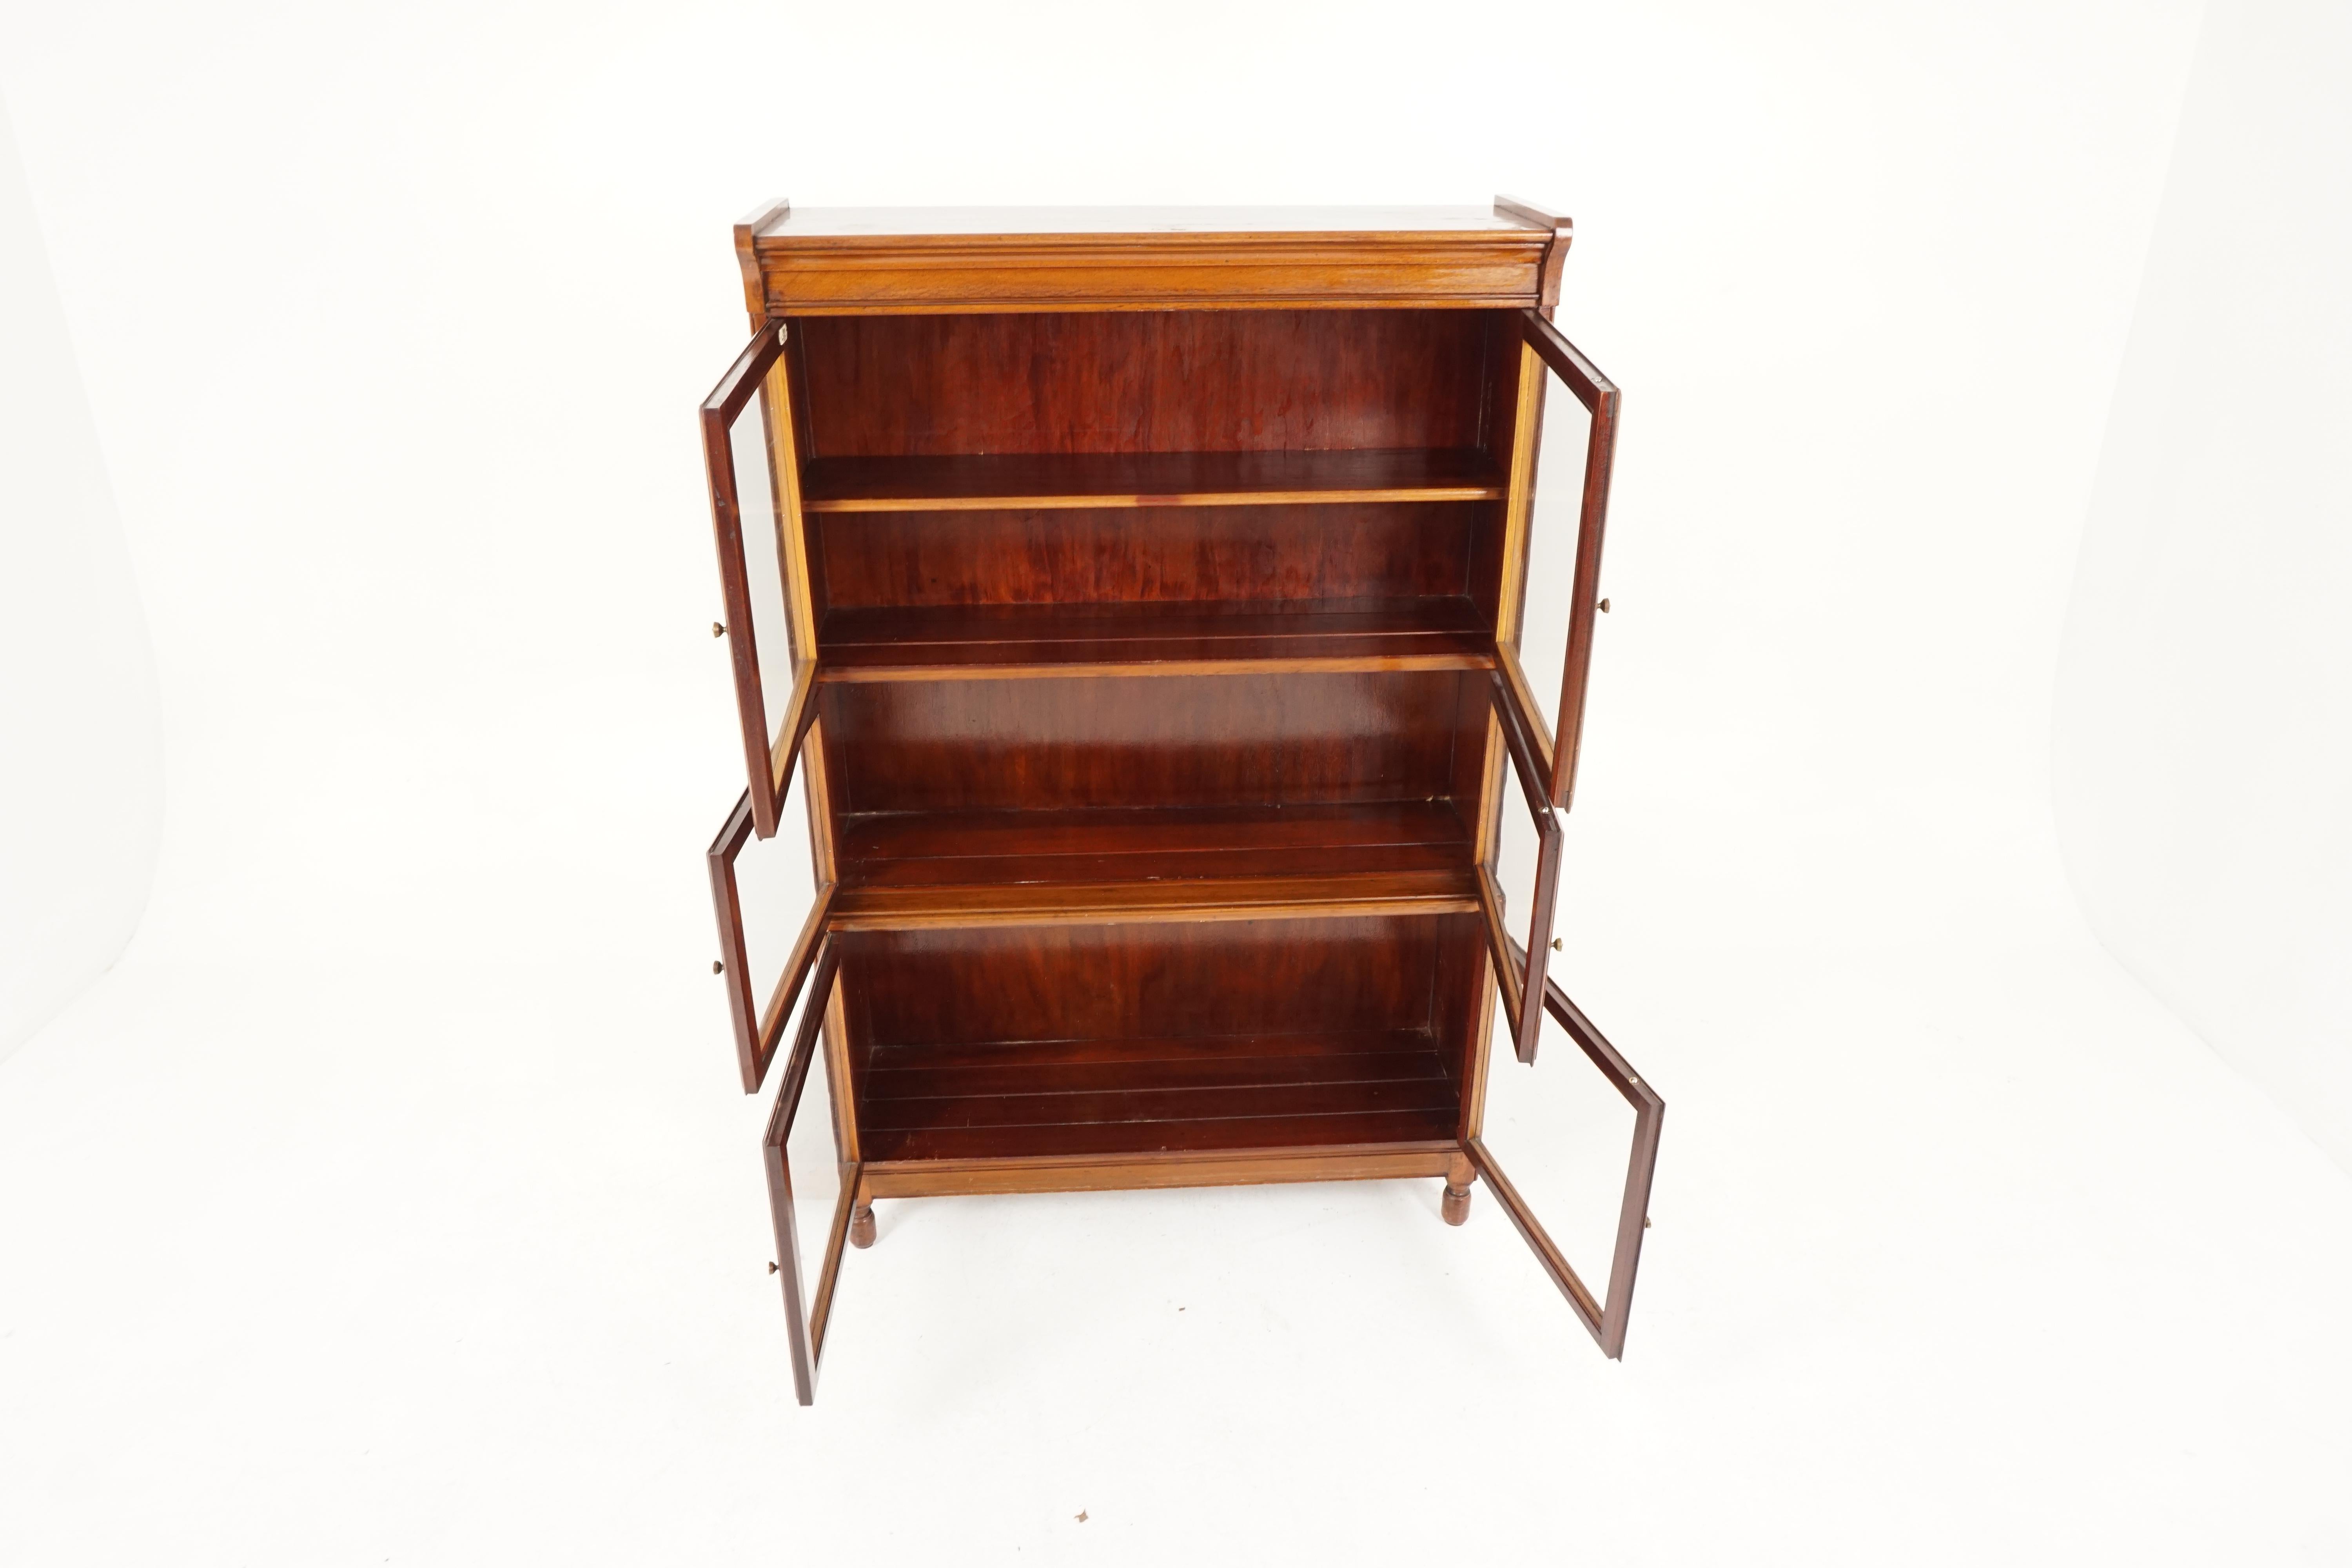 Antique three-tier bookcase, Walnut lawyer sectional bookcase, by Minty, England 1920, B2159

England 1920
Solid Walnut
Original finish
Rectangular top
Pair of large double double glass doors with one adjustable shelf
Below a single section with